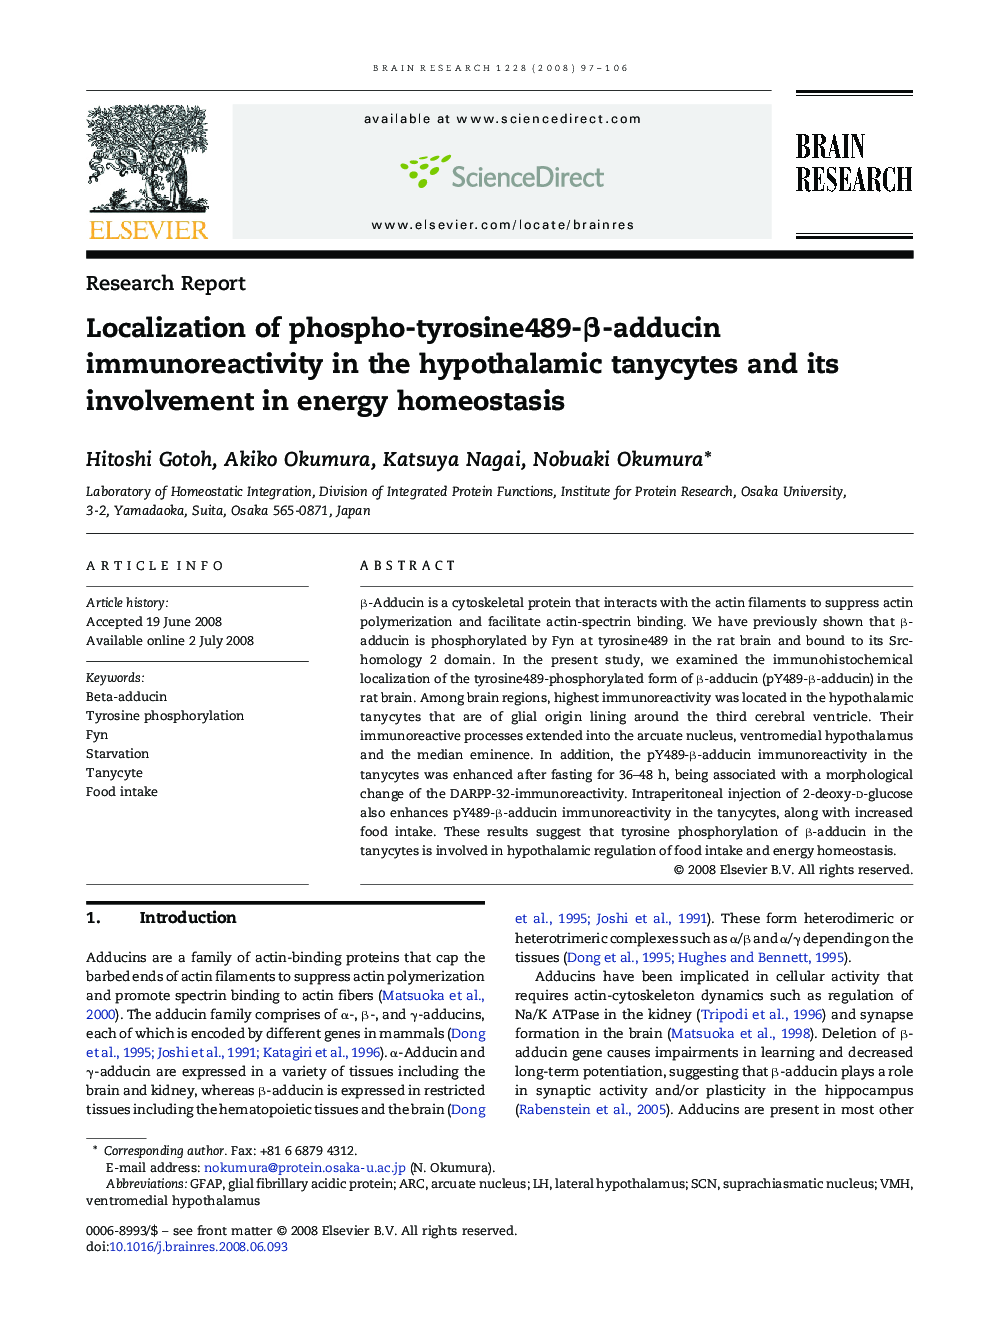 Localization of phospho-tyrosine489-β-adducin immunoreactivity in the hypothalamic tanycytes and its involvement in energy homeostasis